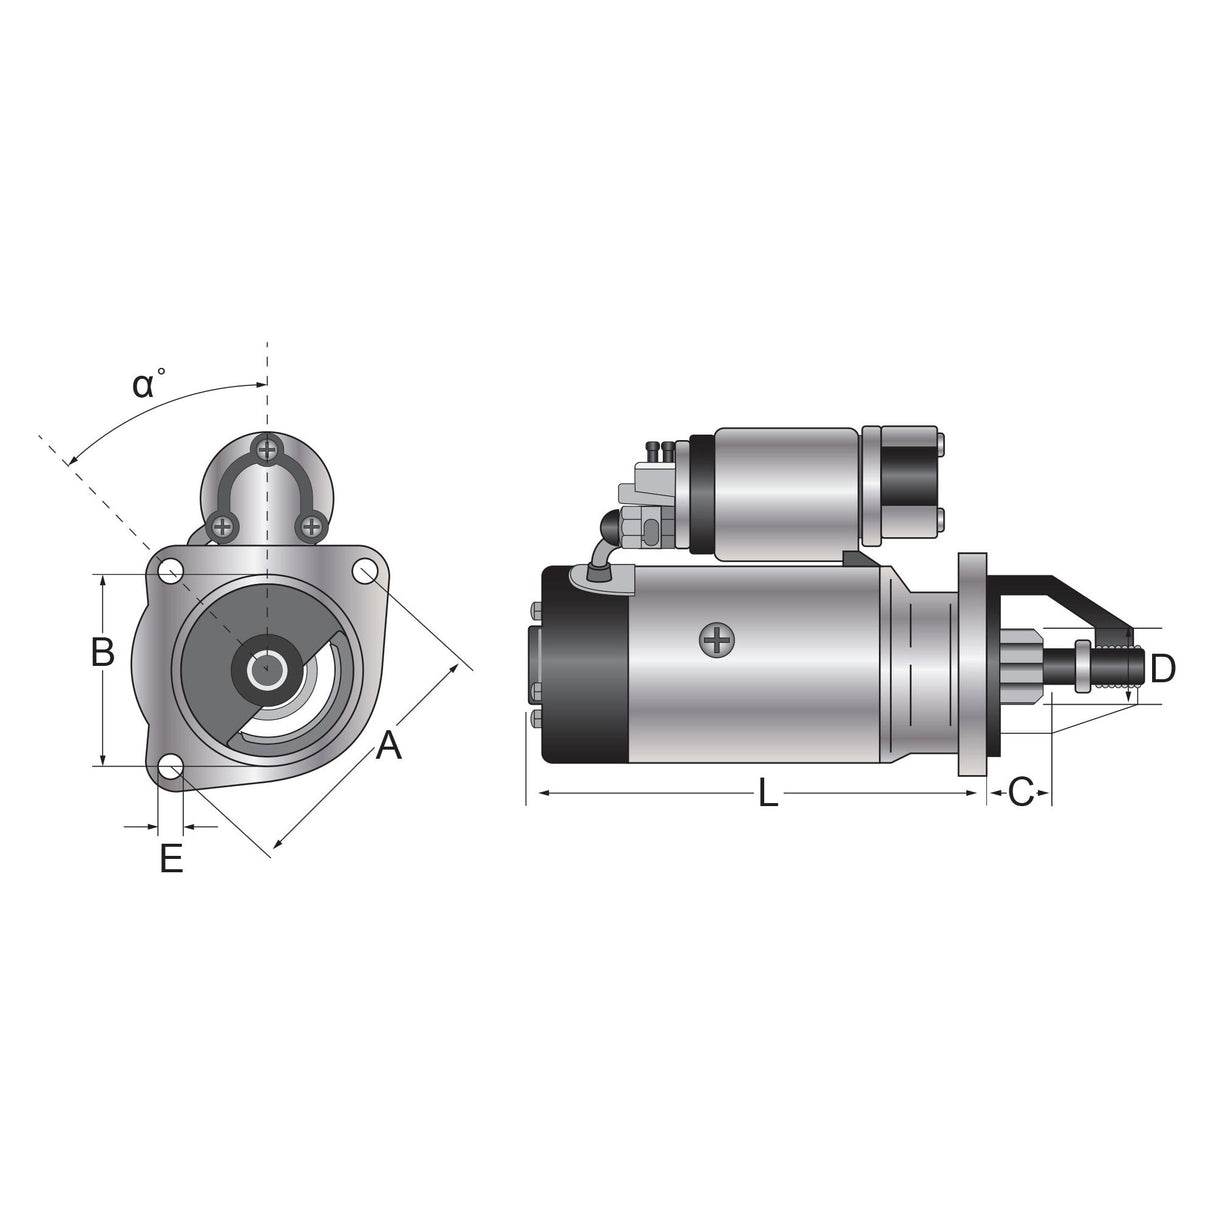 Starter Motor  - 12V, 3.2Kw, Gear Reducted (Mahle)
 - S.127865 - Farming Parts